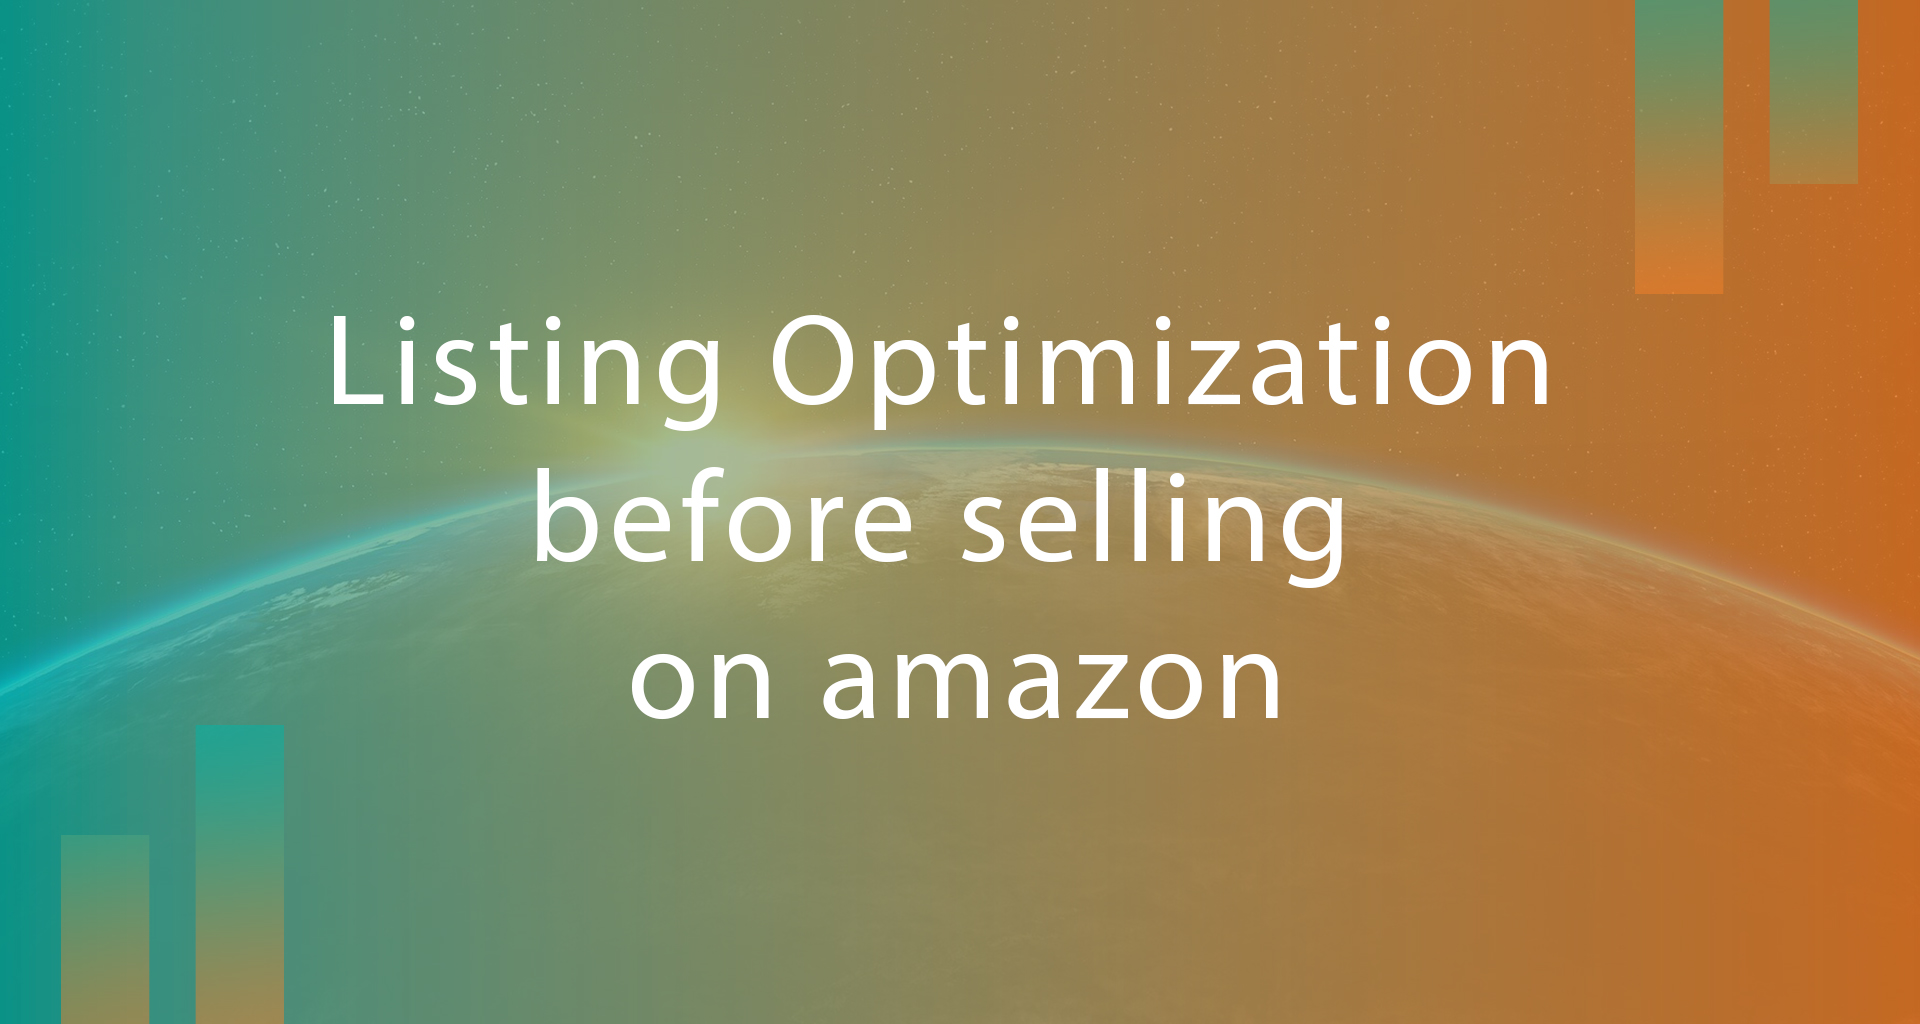 How to do Amazon Listing Optimization to make your product best